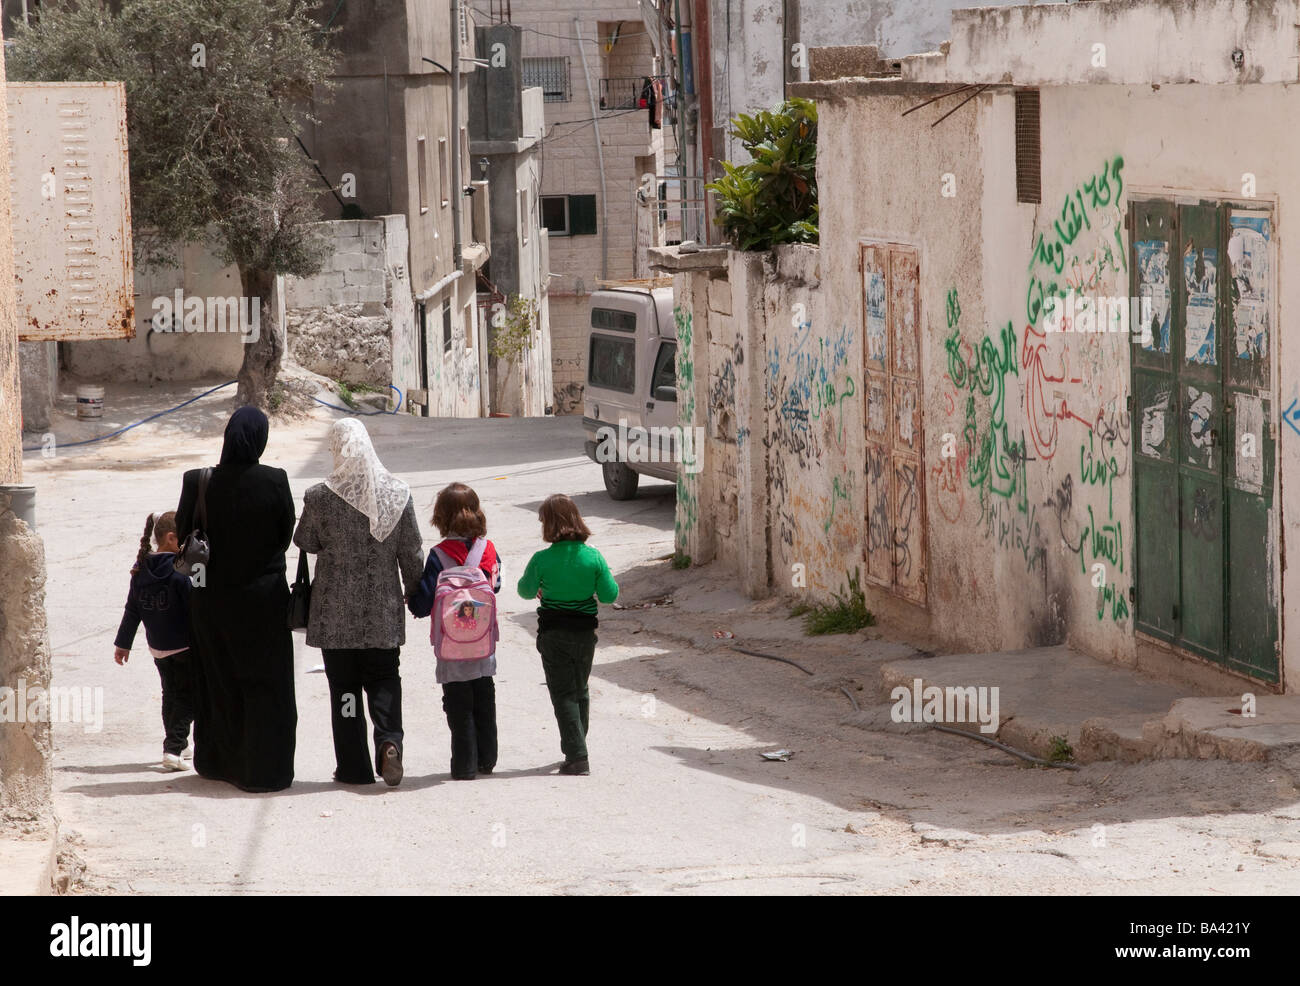 Palestinian Authority Bethlehem Aida refugee camp women and children walking passed walls graffitis in the street Stock Photo